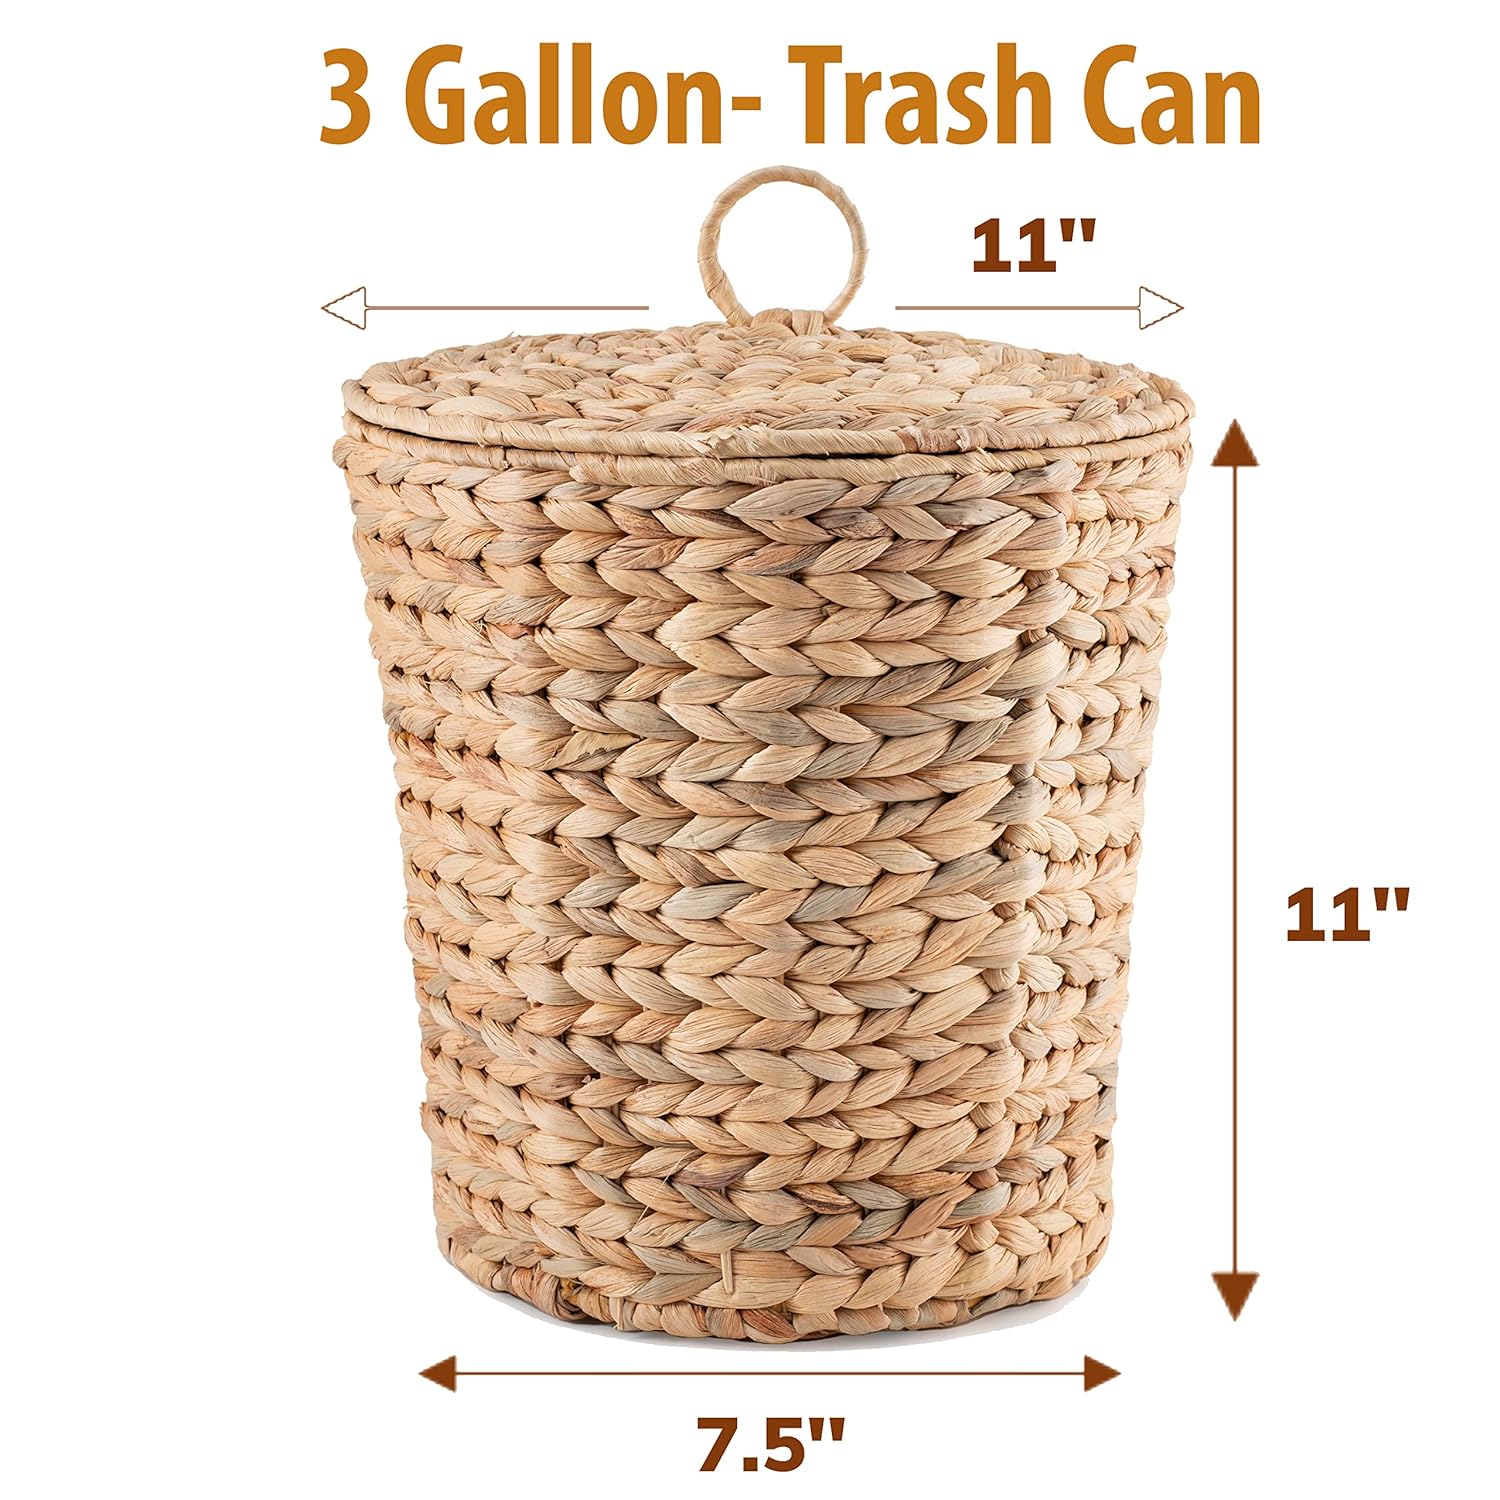 https://bigbigmart.com/wp-content/uploads/2023/10/KOLWOVEN-Wicker-Trash-Can-with-Lid-in-Bedroom-Bathroom-3-Gallon-Small-Trash-Can-in-Office-Boho-Woven-Wicker-Waste-Basket-Office-Garbage-Cans-for-Under-Desk-with-Plastic-Insert2.jpg